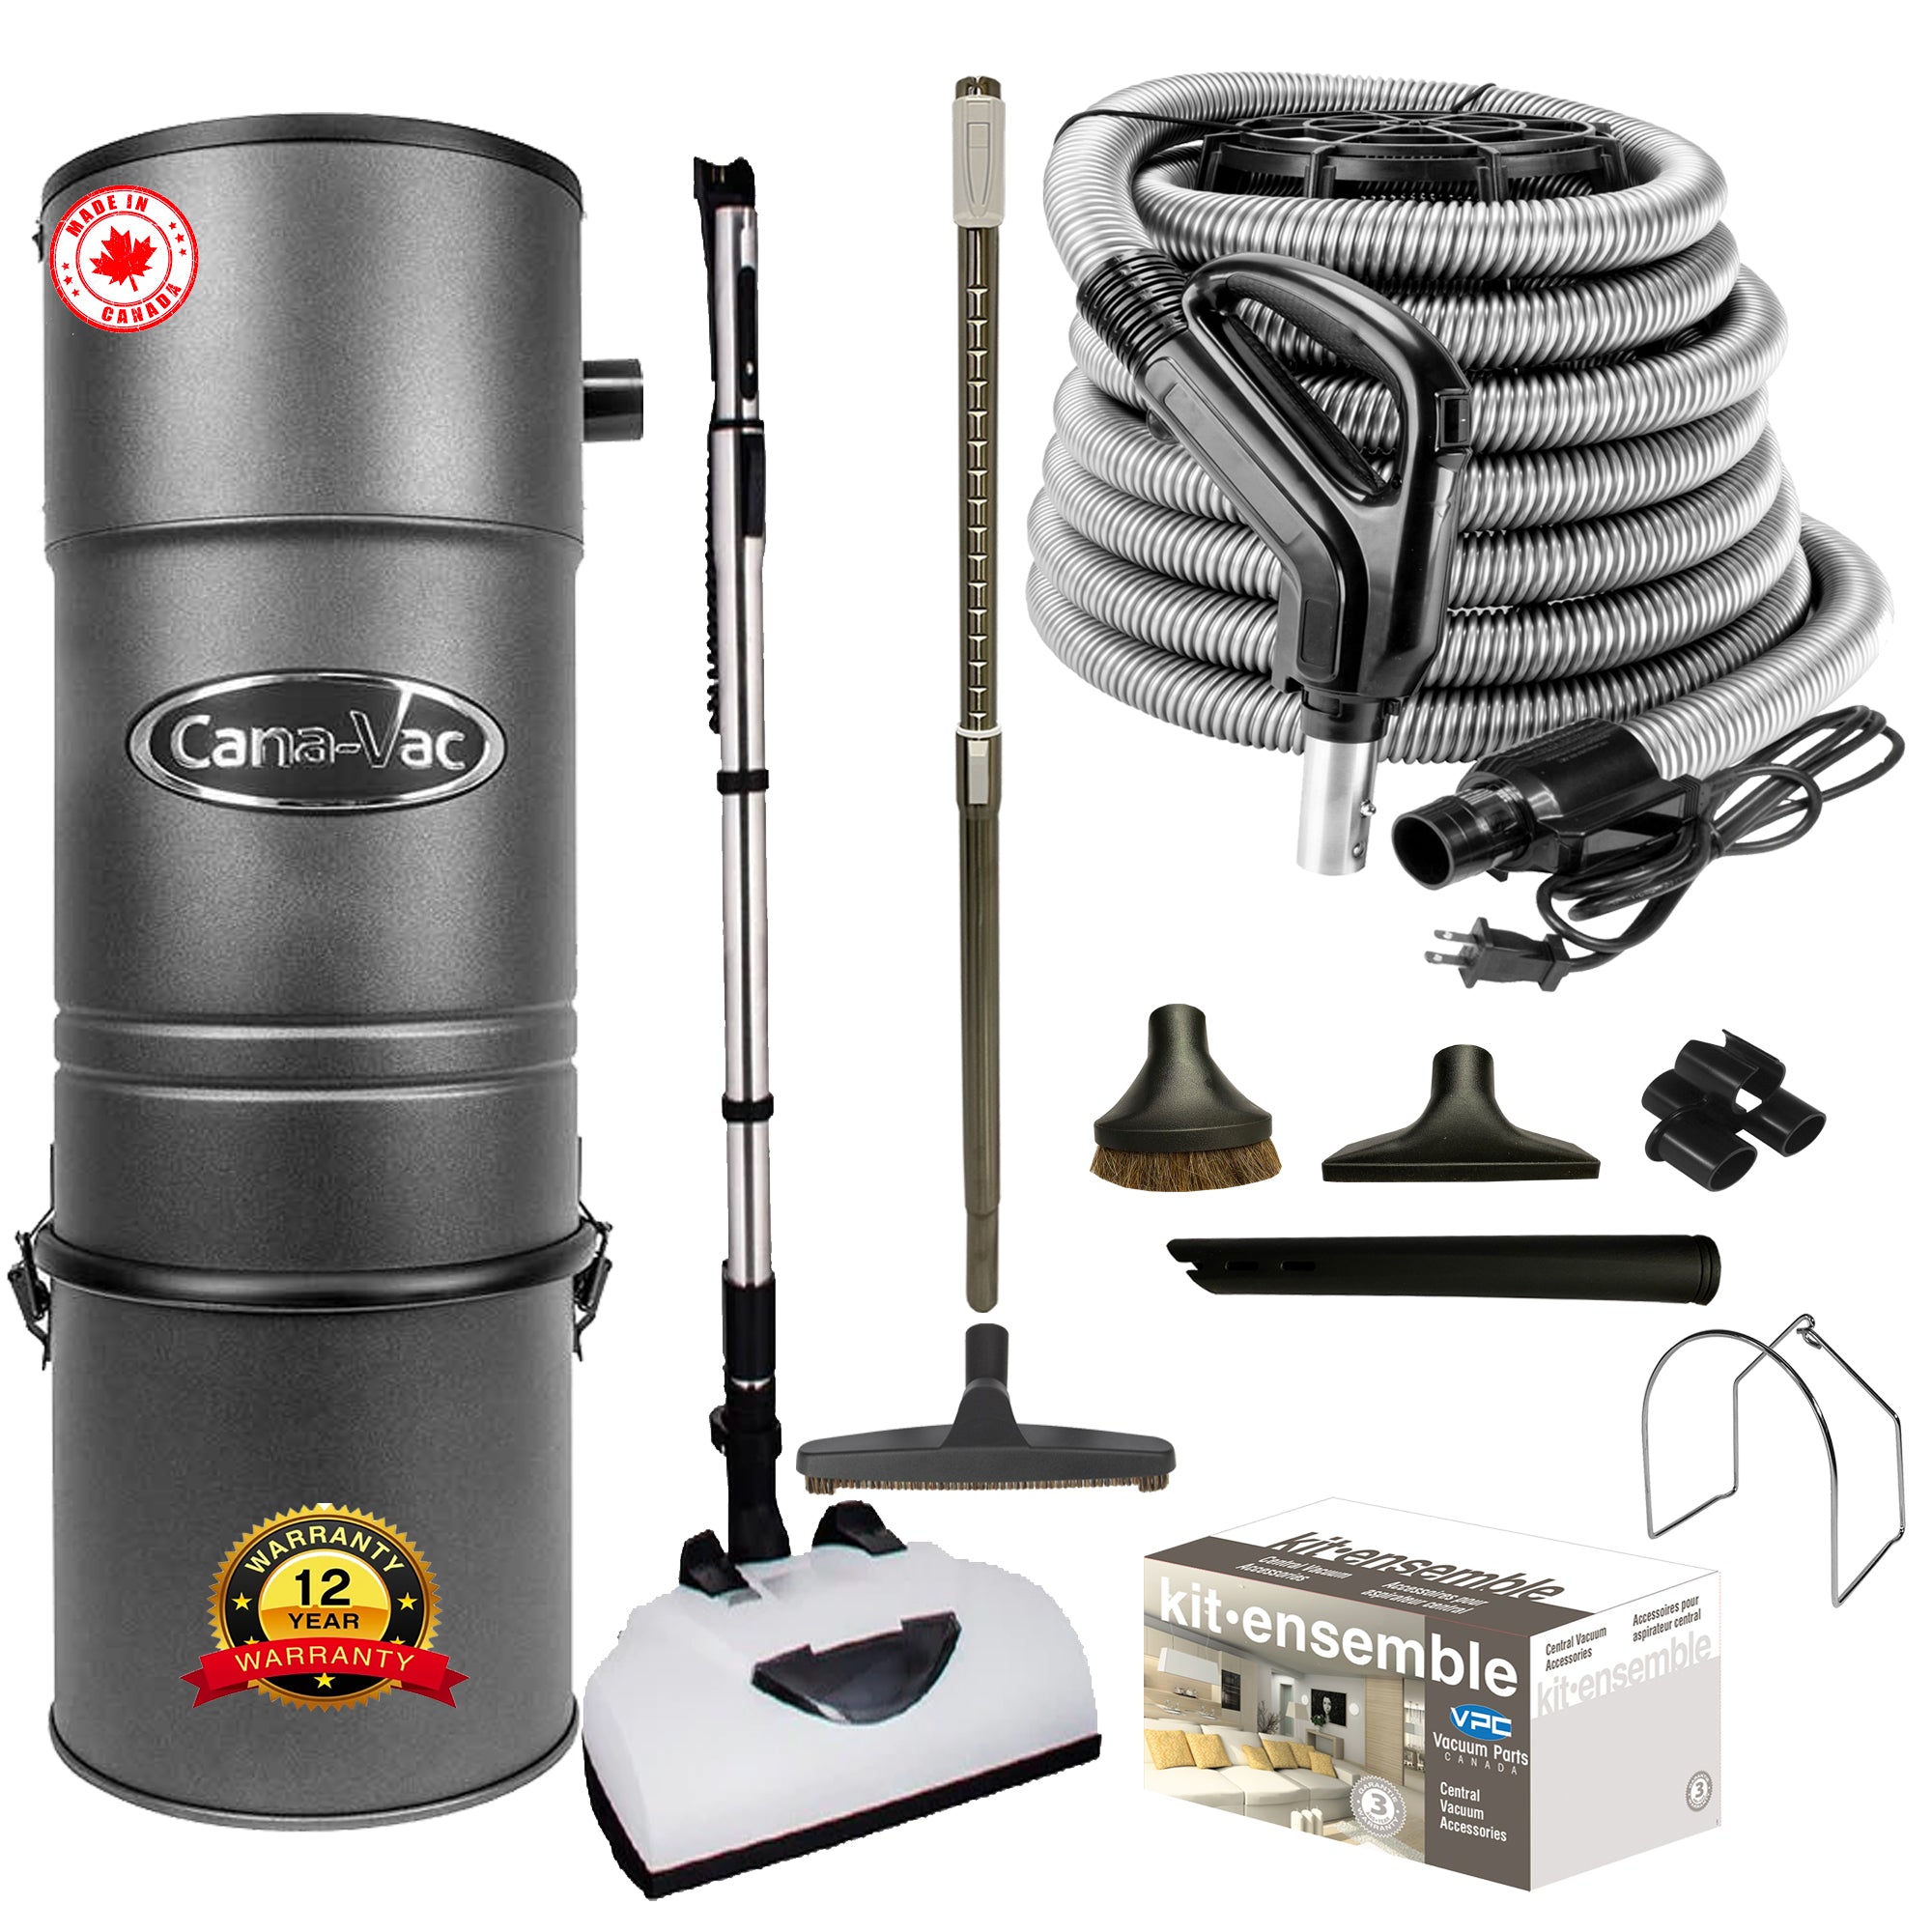 CanaVac CV787 Central Vacuum Cleaner with Deluxe Electric Package